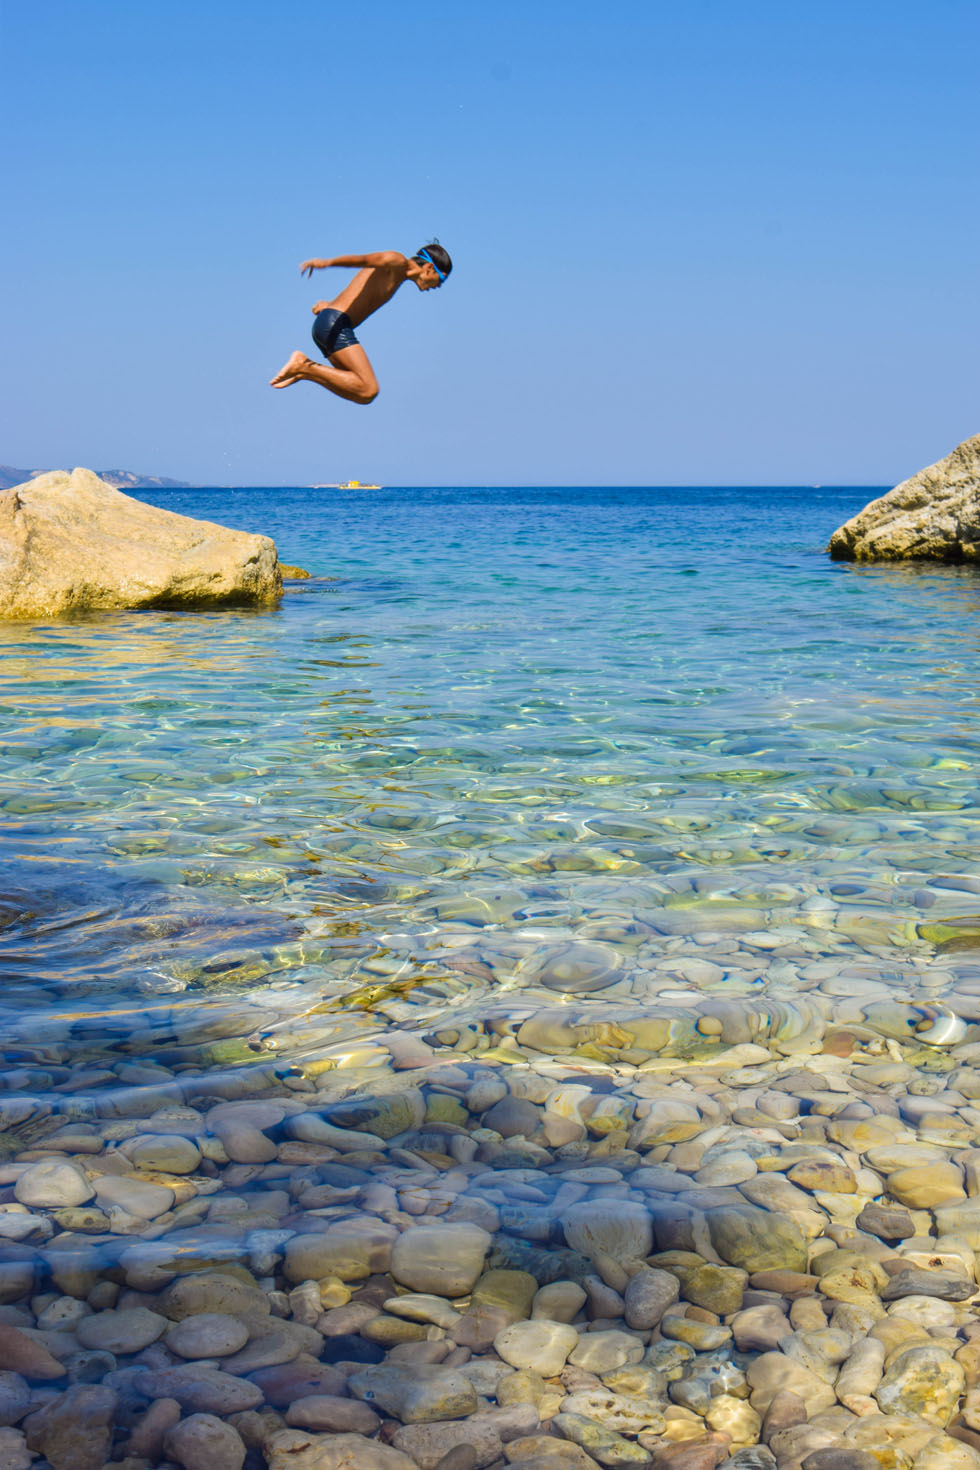 Jumping into the Aegean